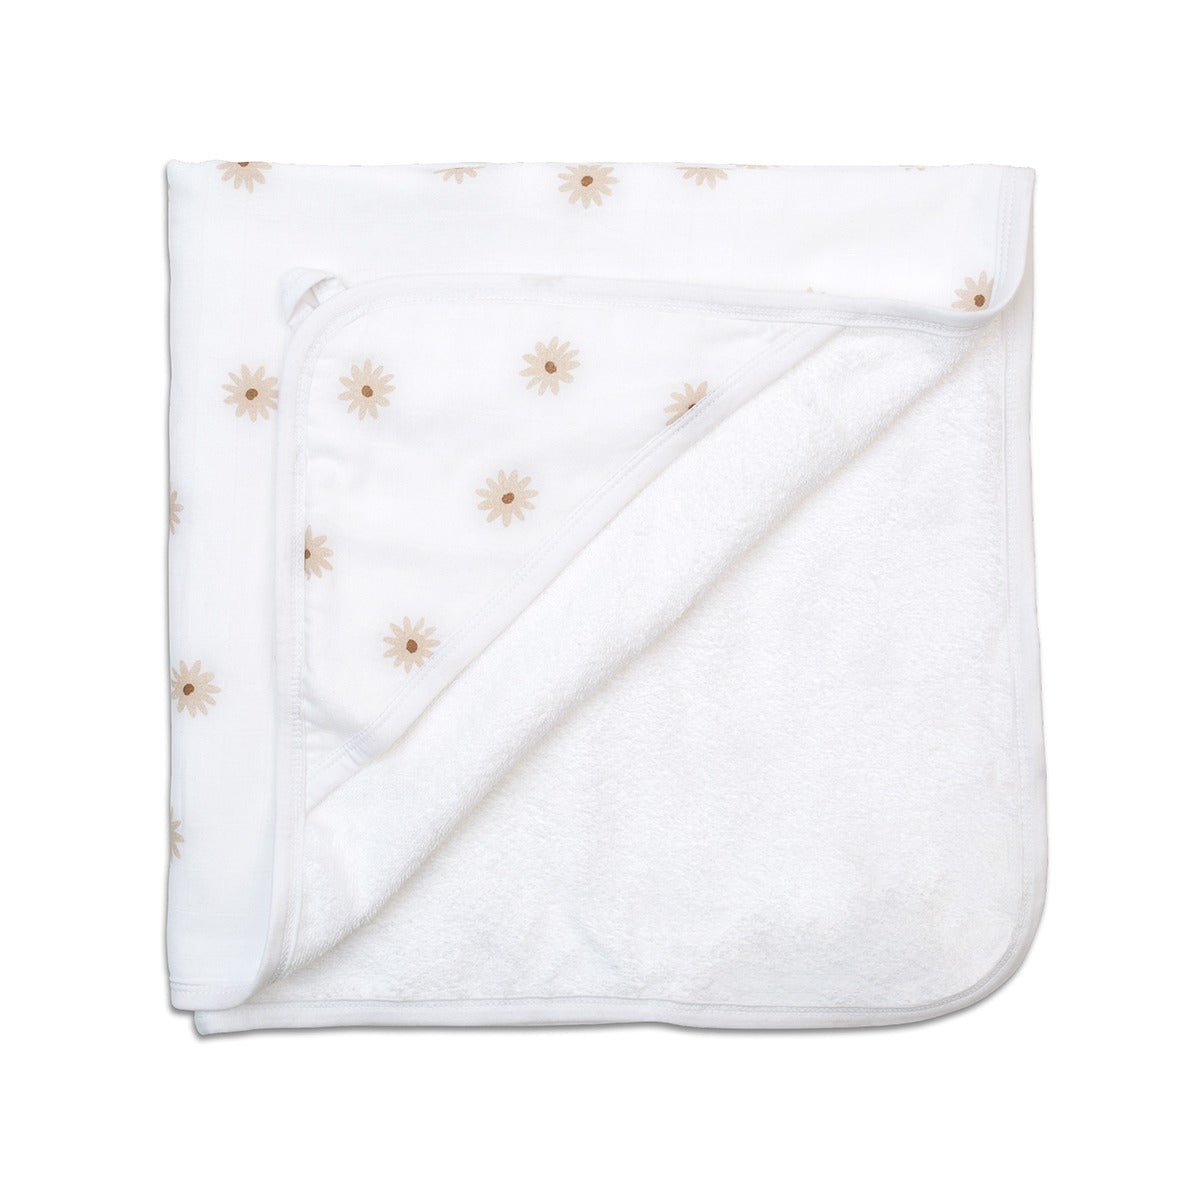 White hooded baby towel with a beige flower design